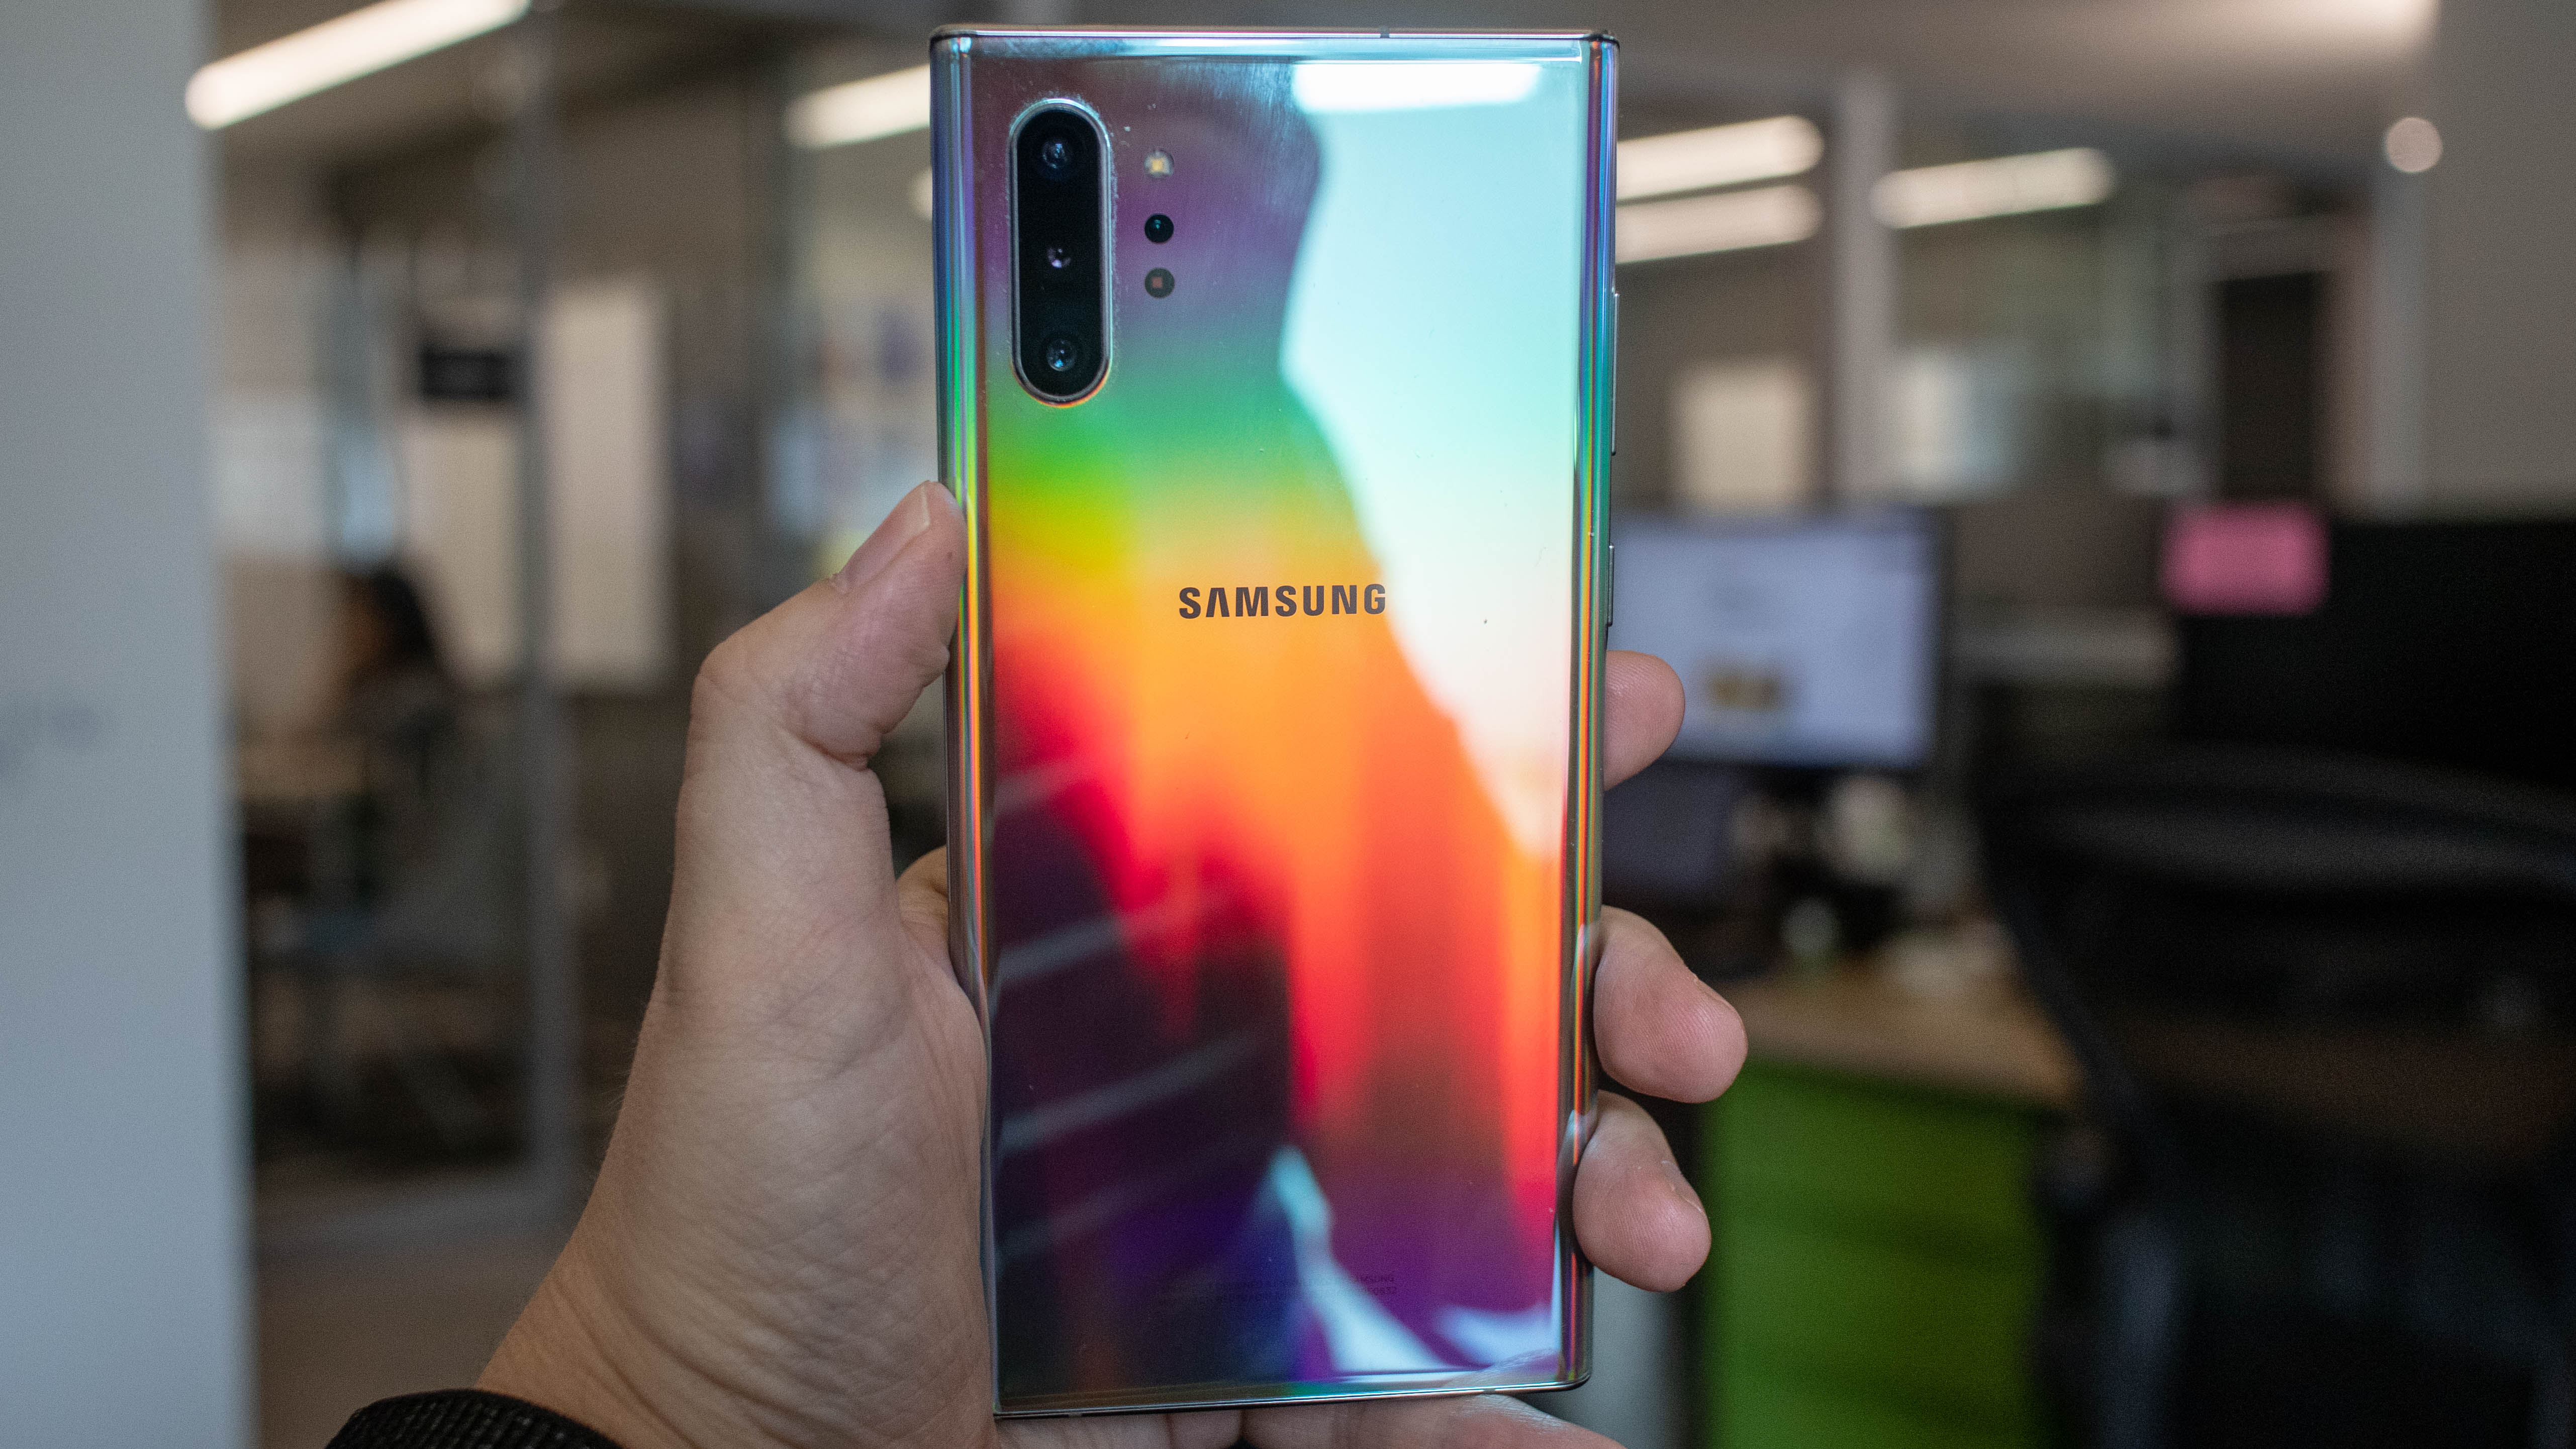 Samsung Galaxy Note 10 Plus: ongoing camera review and the first 72 hours